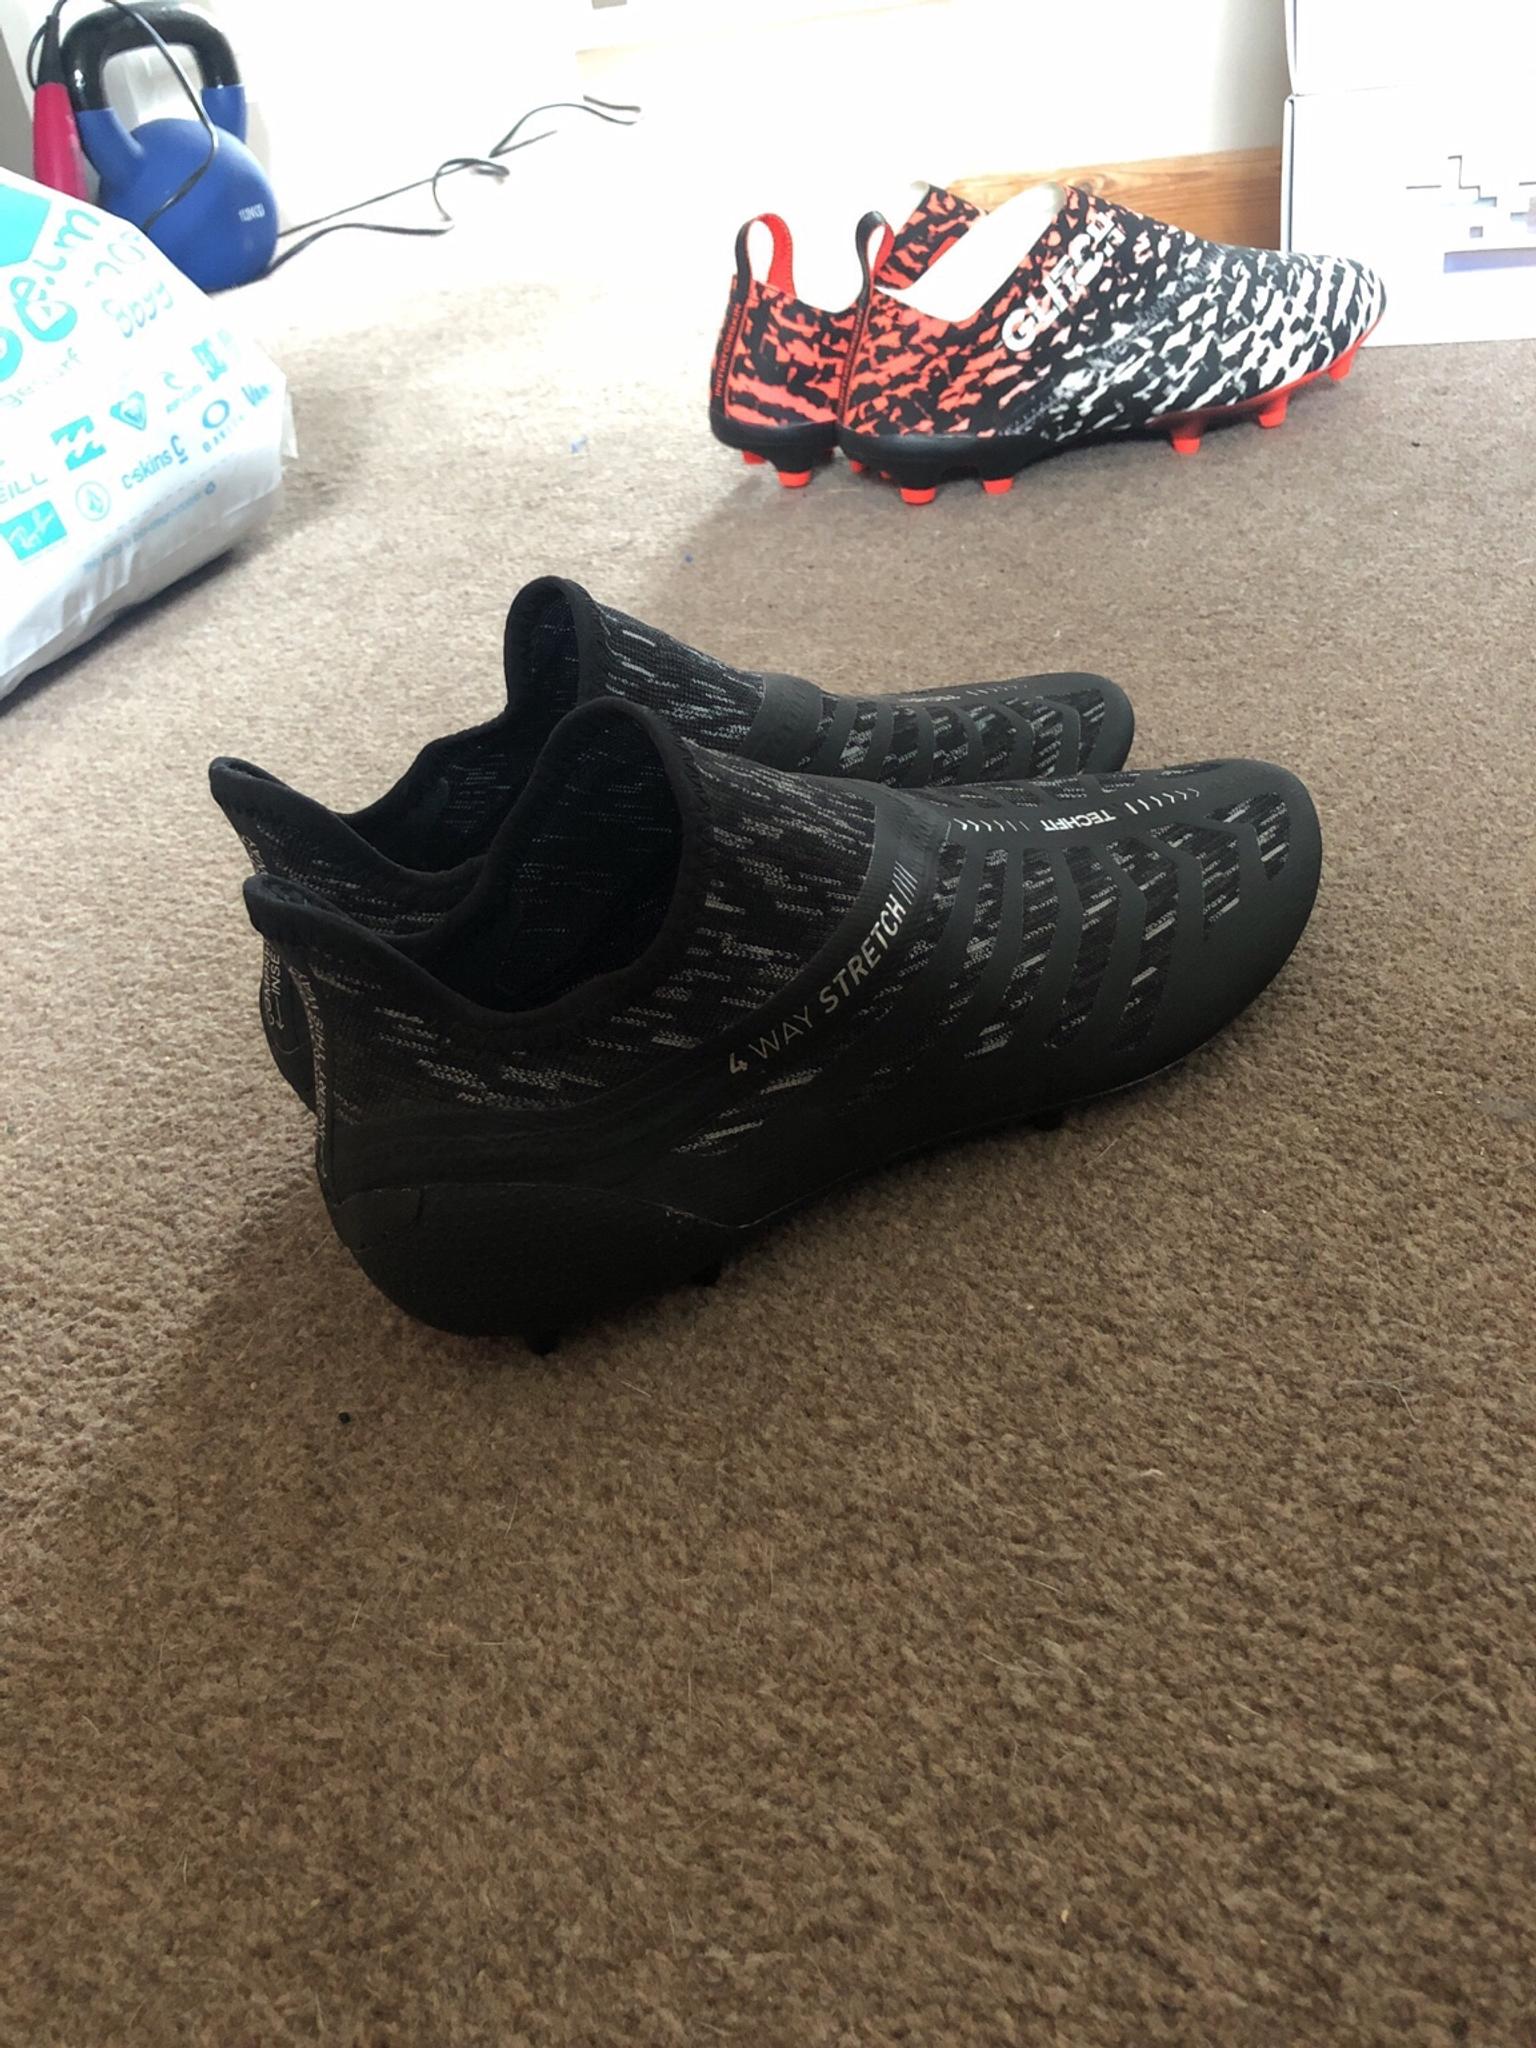 adidas glitch boots for sale